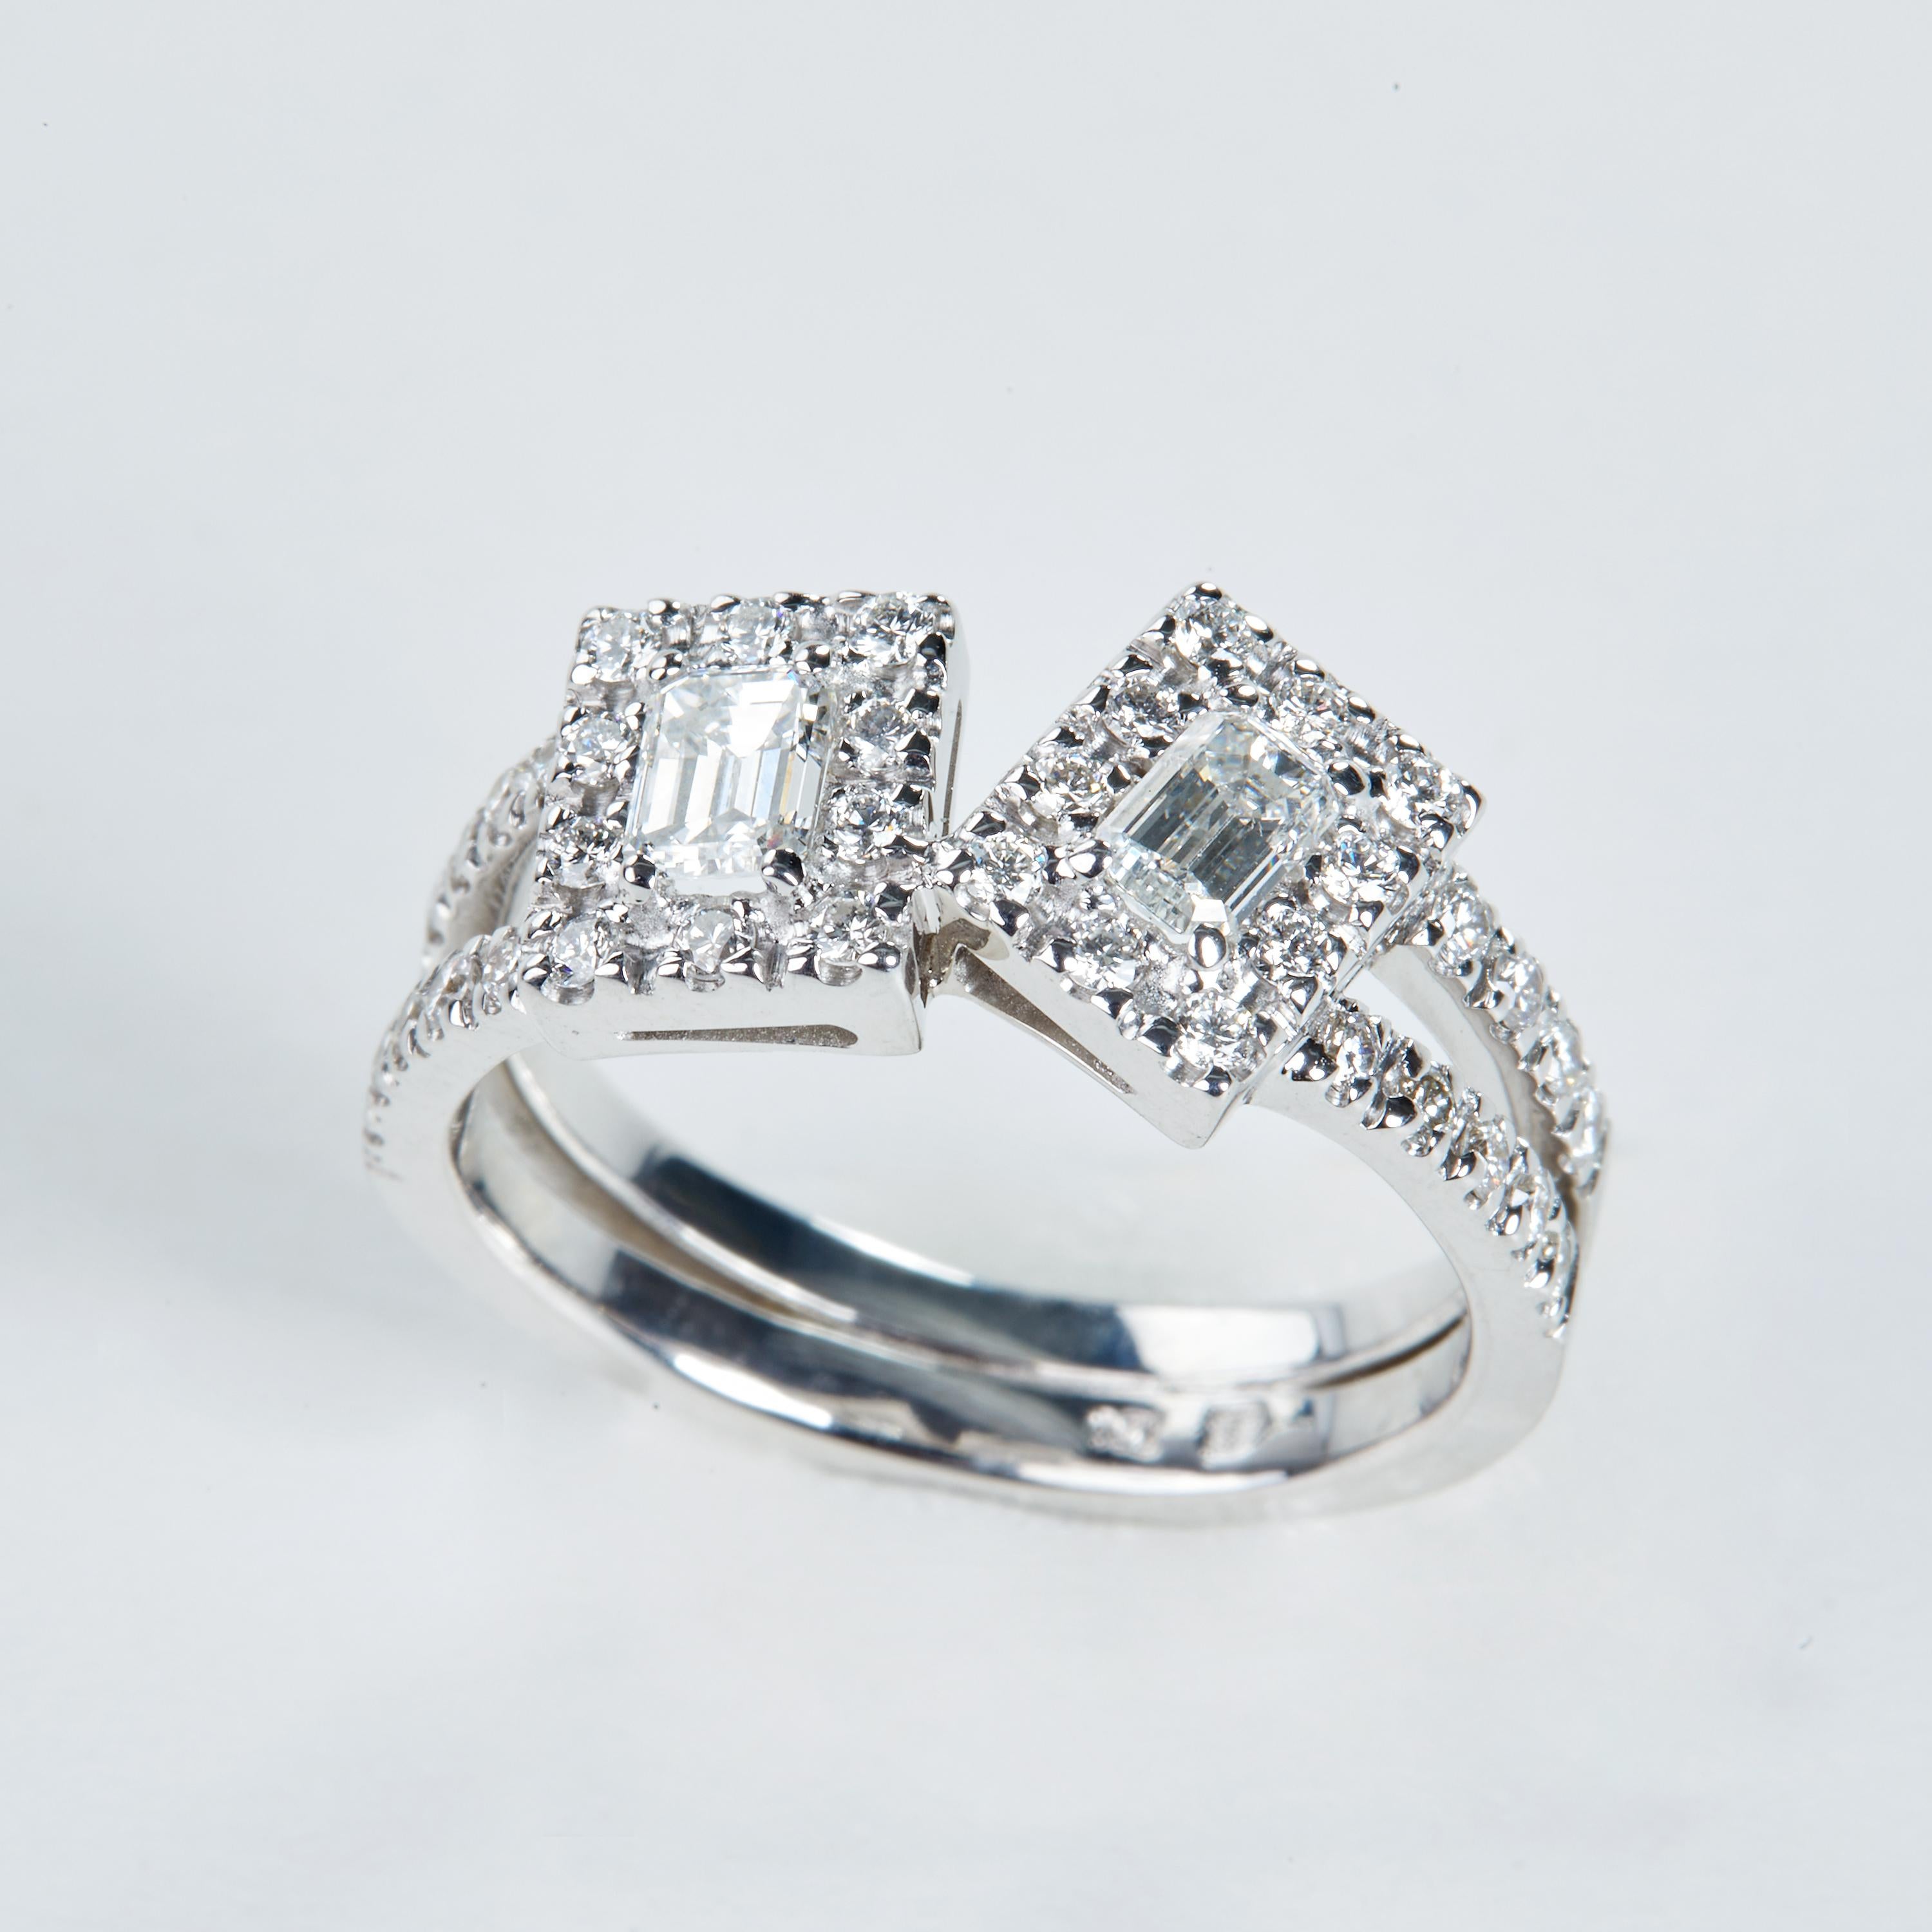 18 Karat White Gold Diamond  Ring

42 Diam. 0.60 carat
2 Diamant Baguette 0.45 carat



Size EU 52 US 6.1


Founded in 1974, Gianni Lazzaro is a family-owned jewelery company based out of Düsseldorf, Germany.
Although rooted in Germany, Gianni